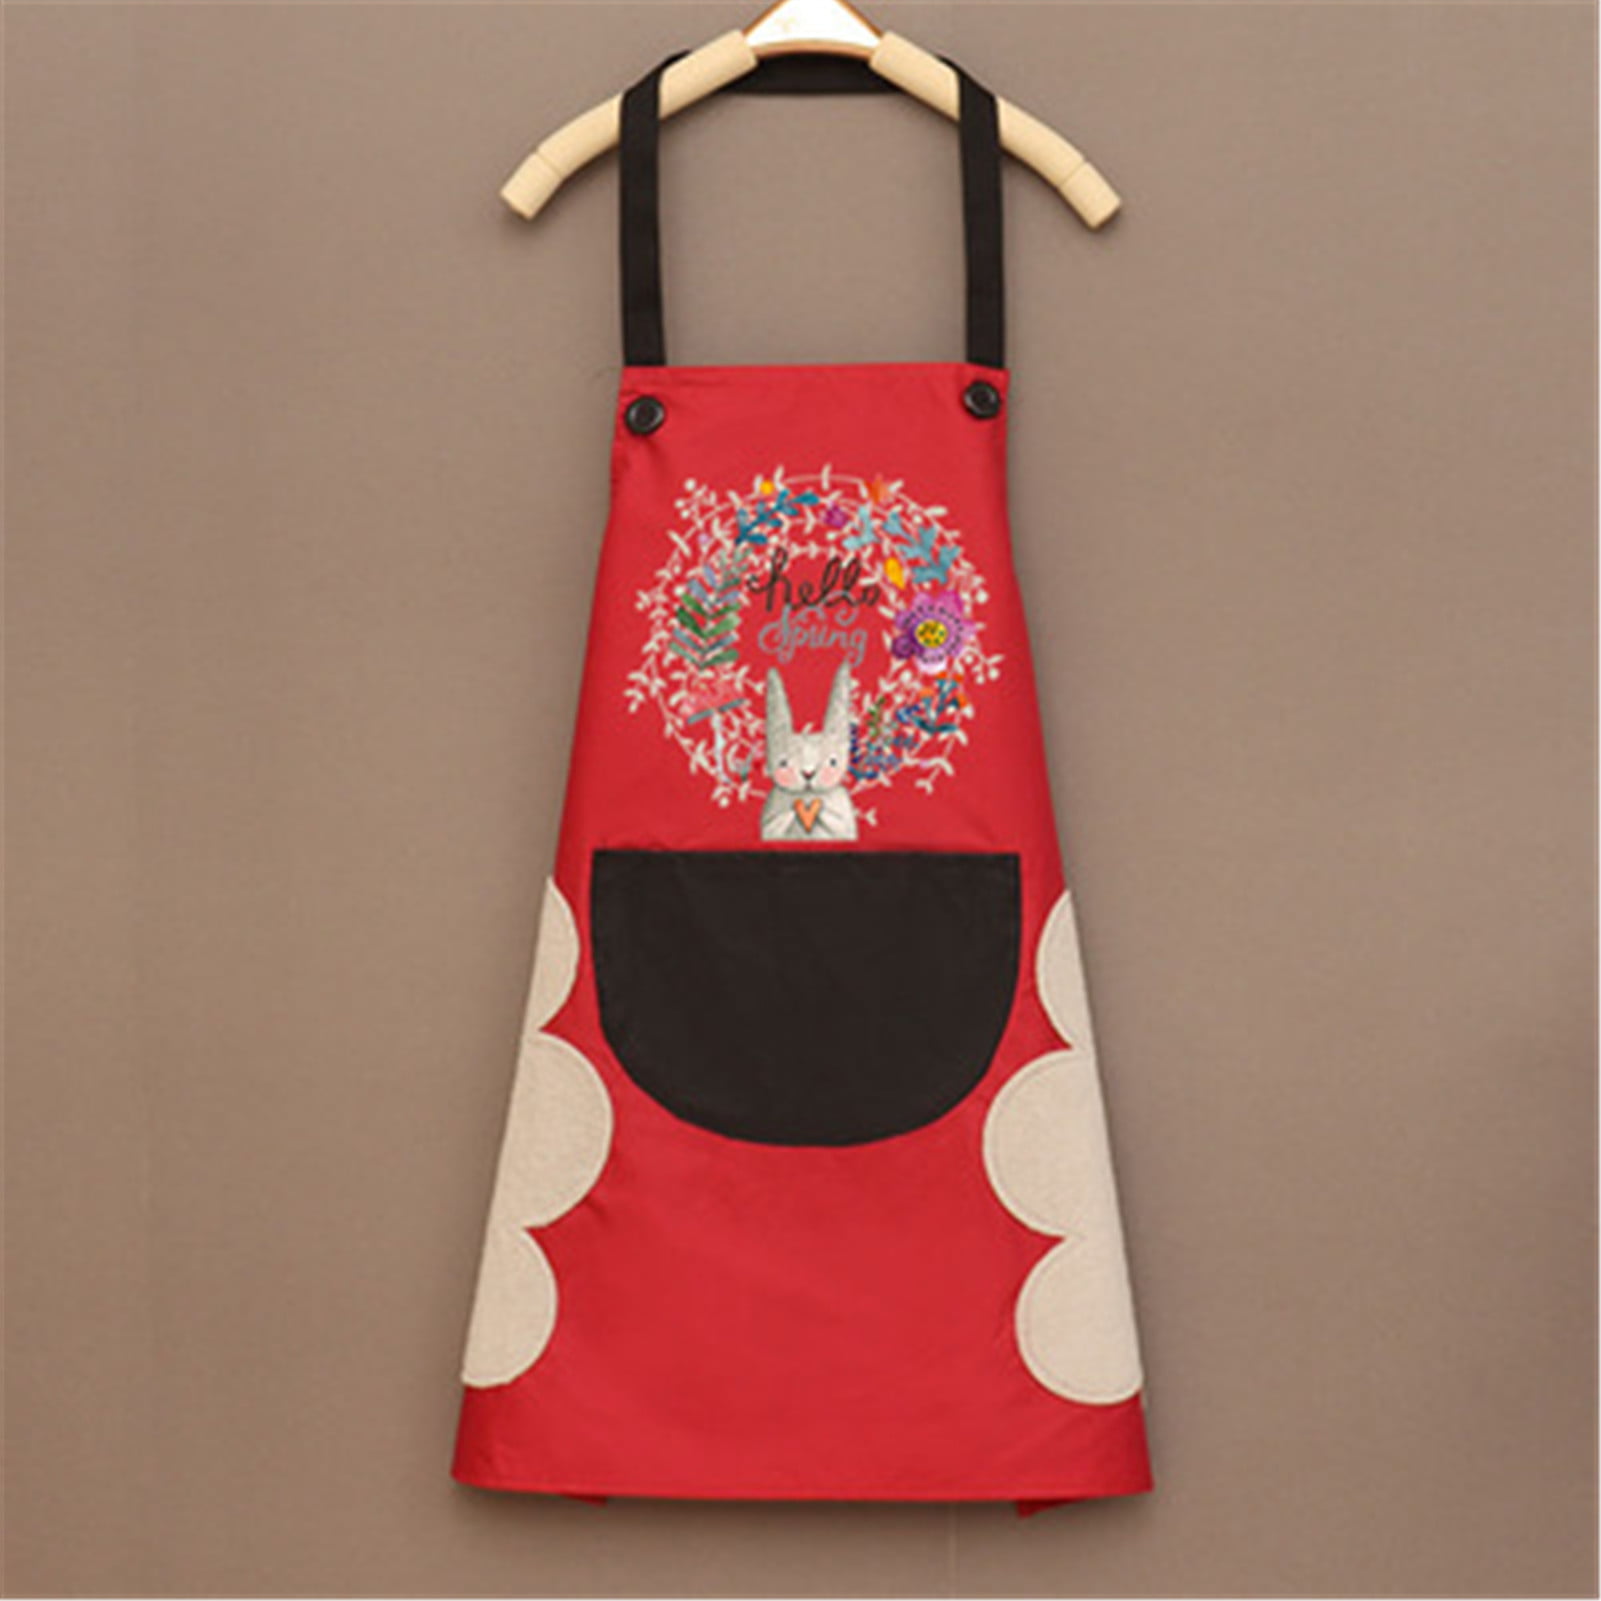 Ludlz Women Kitchen Apron With Hand Wipe Pockets For Cooking Baking Wipeable Waterproof Oil 